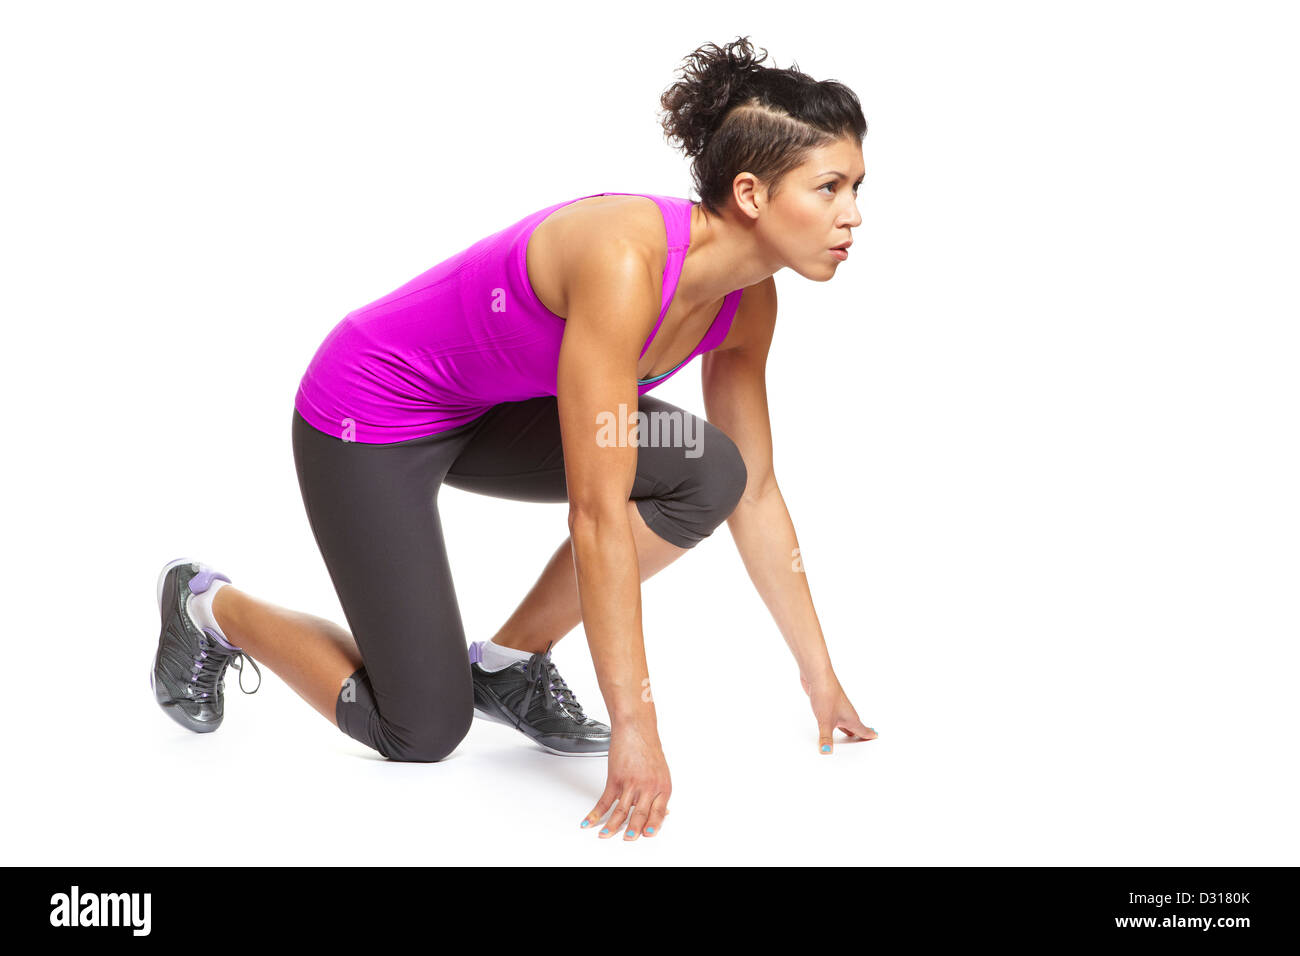 Muscular young woman in starting position and ready to race in sports outfit on white background Stock Photo